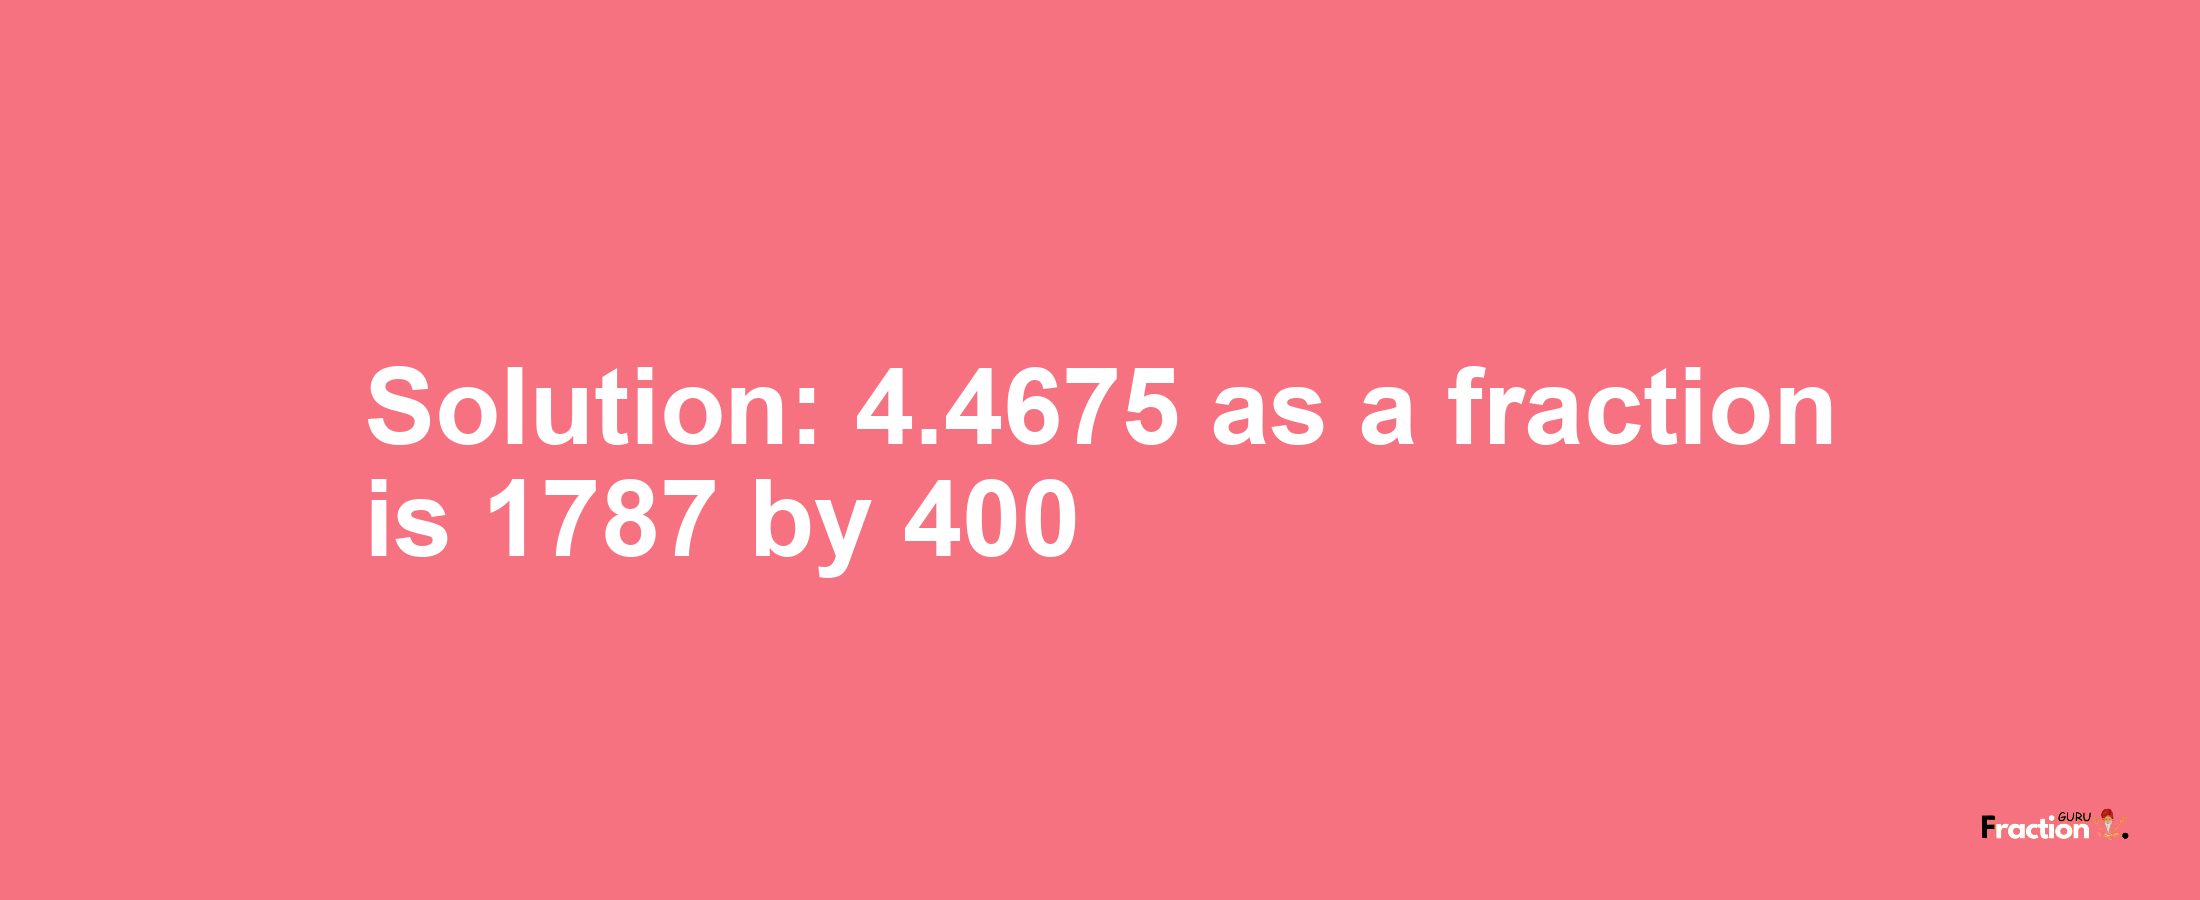 Solution:4.4675 as a fraction is 1787/400